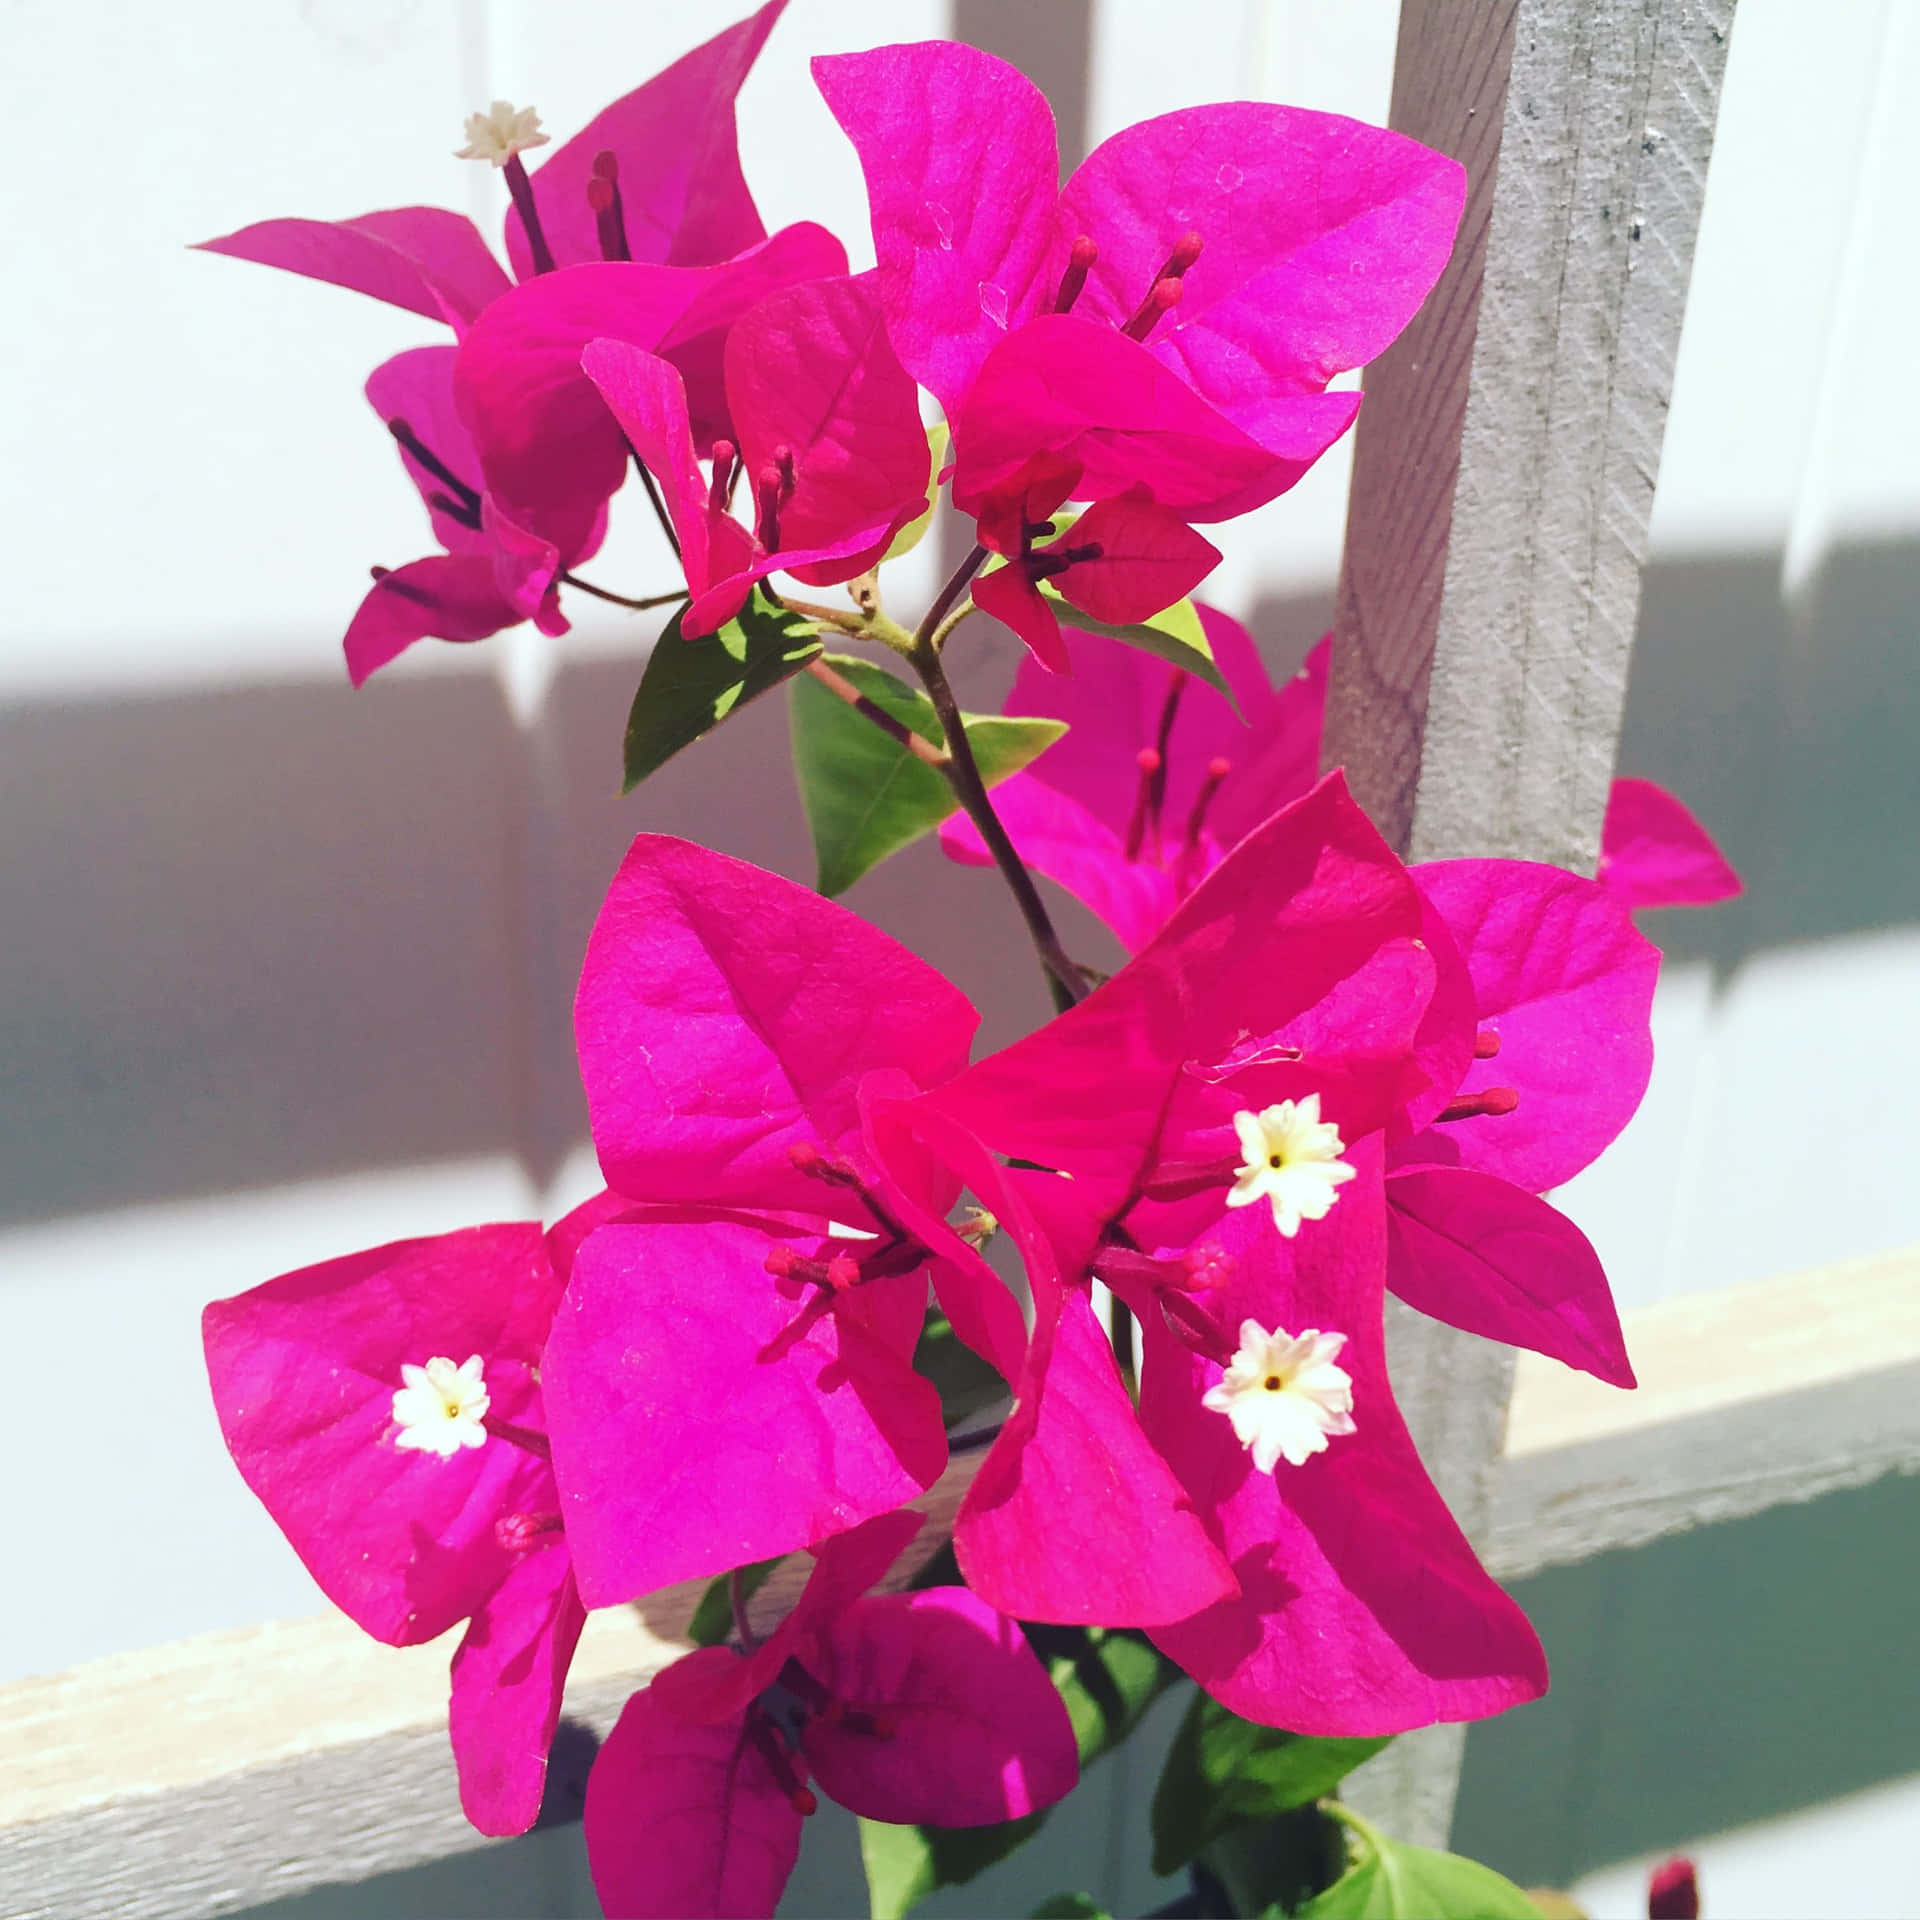 A lush display of blooming Bougainvillea